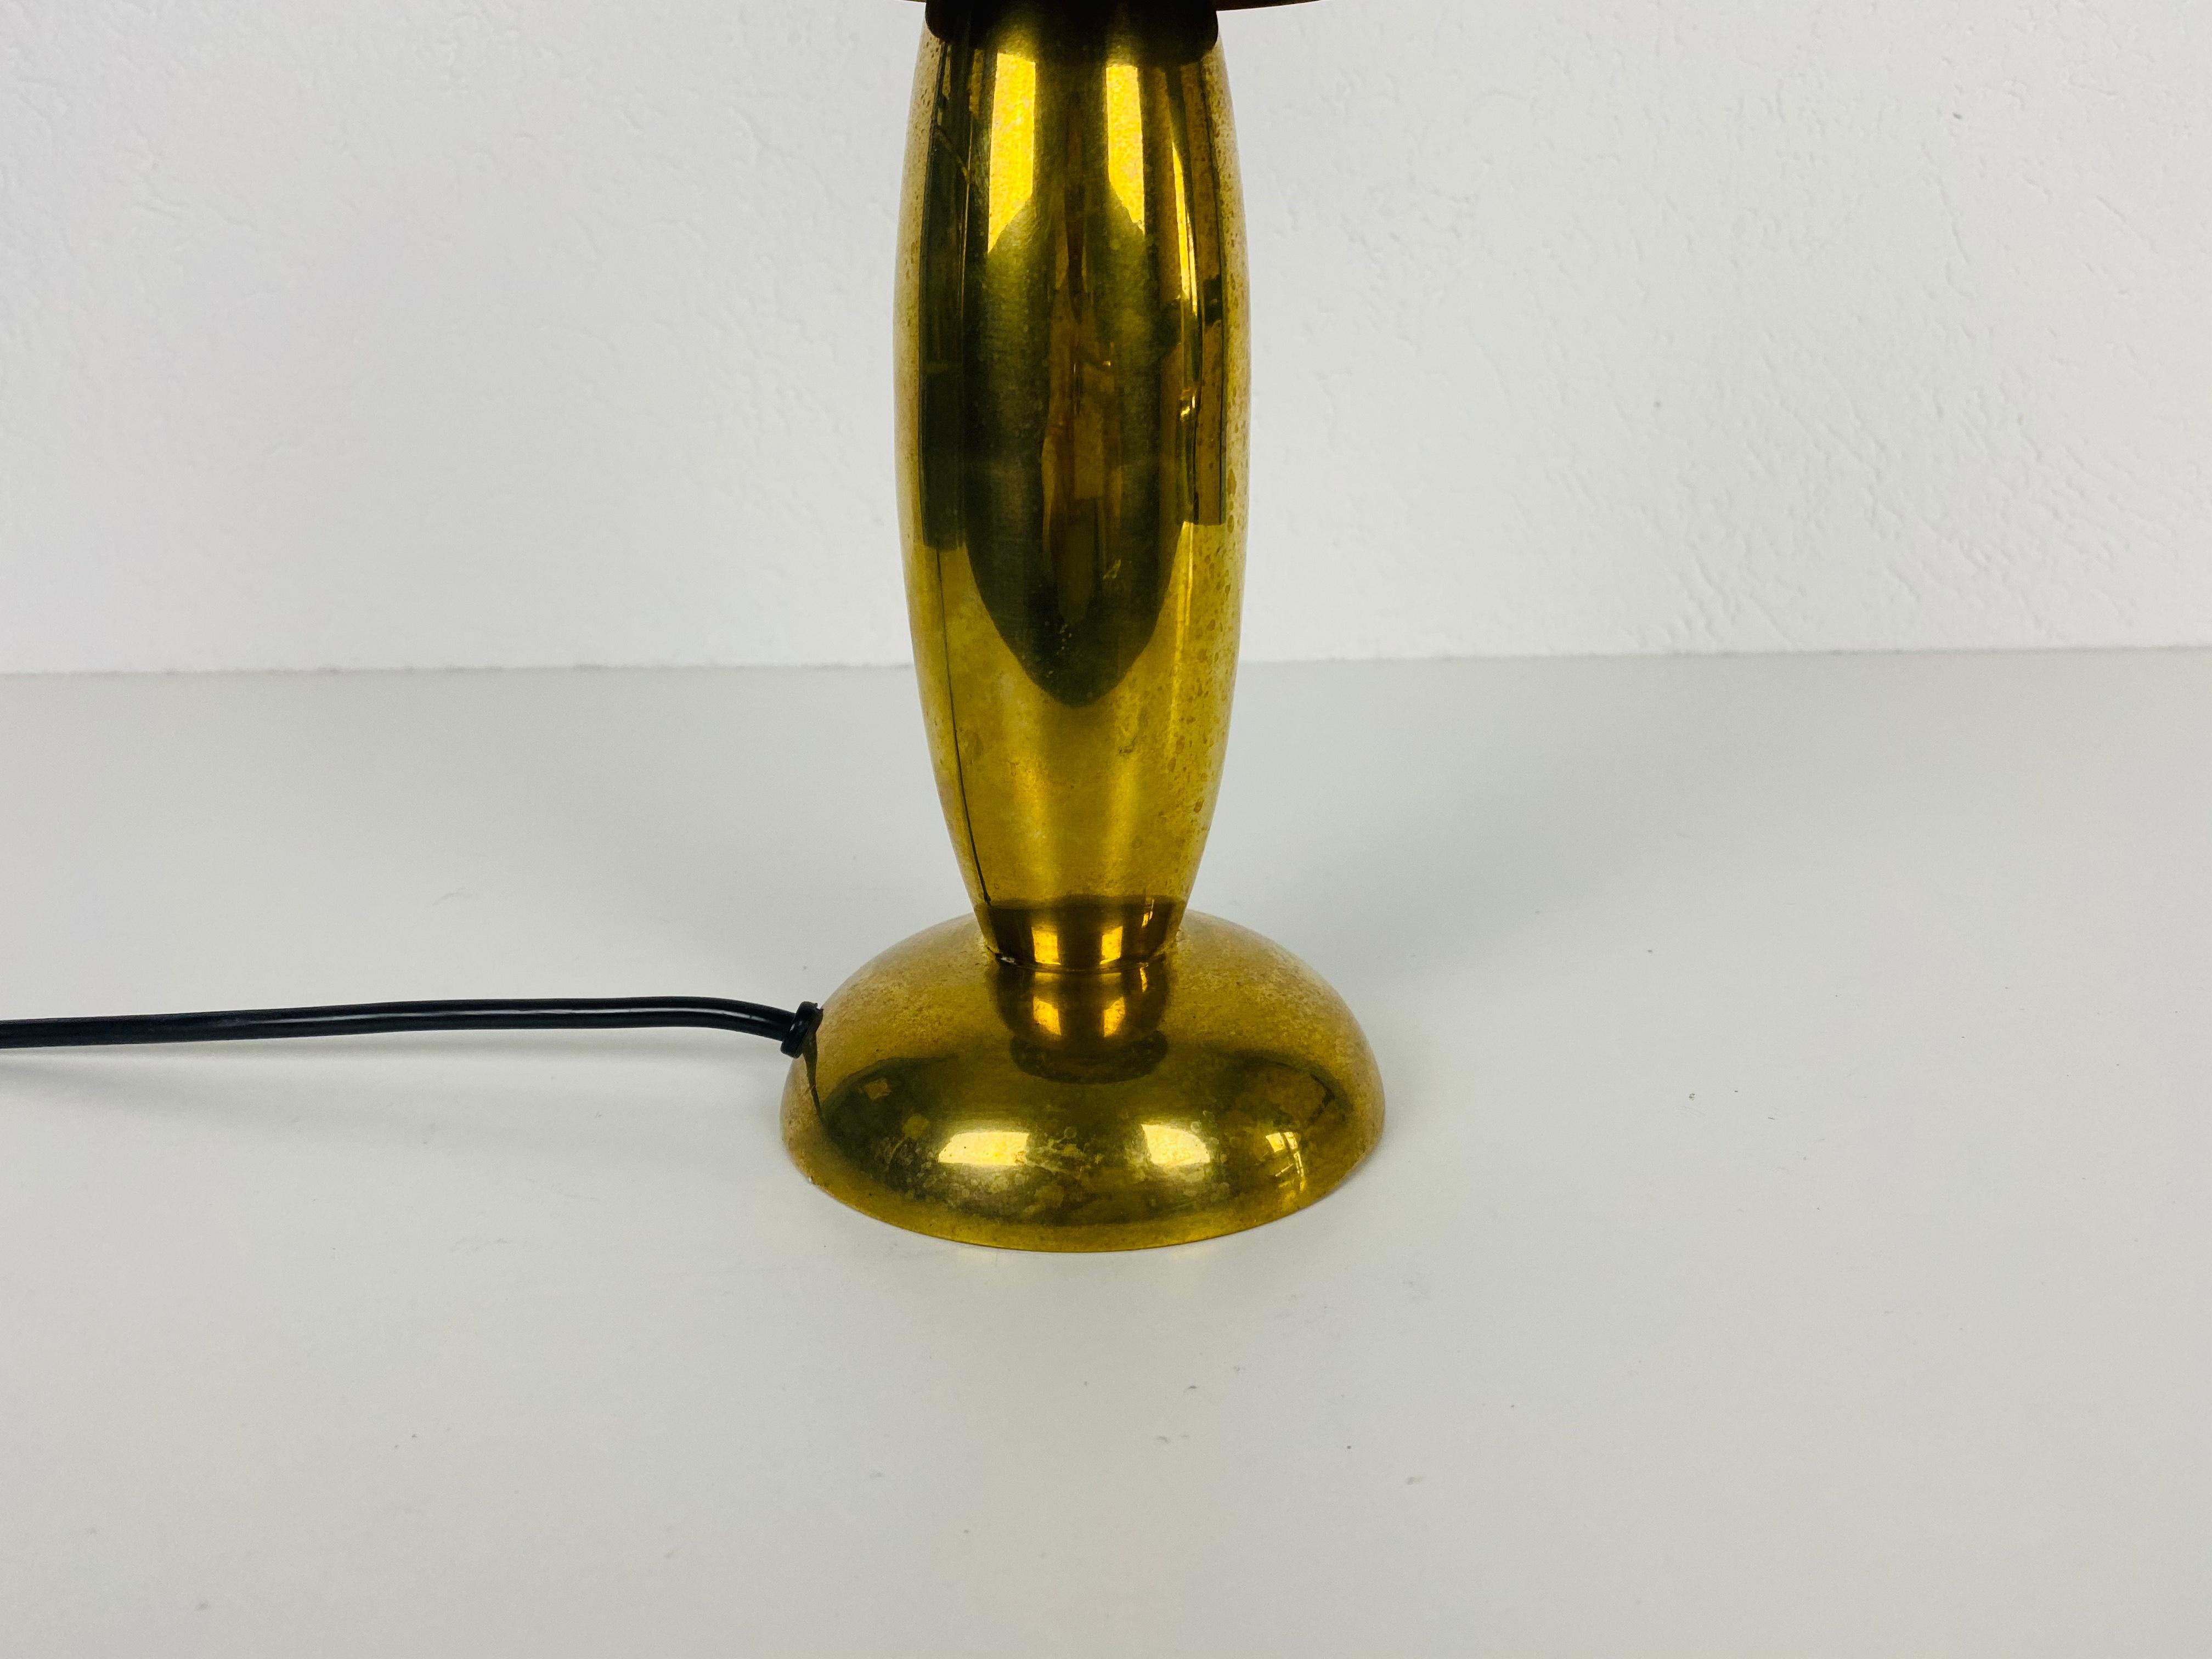 Midcentury Solid Brass Table Lamp by Studio Lambert, 1980s For Sale 2